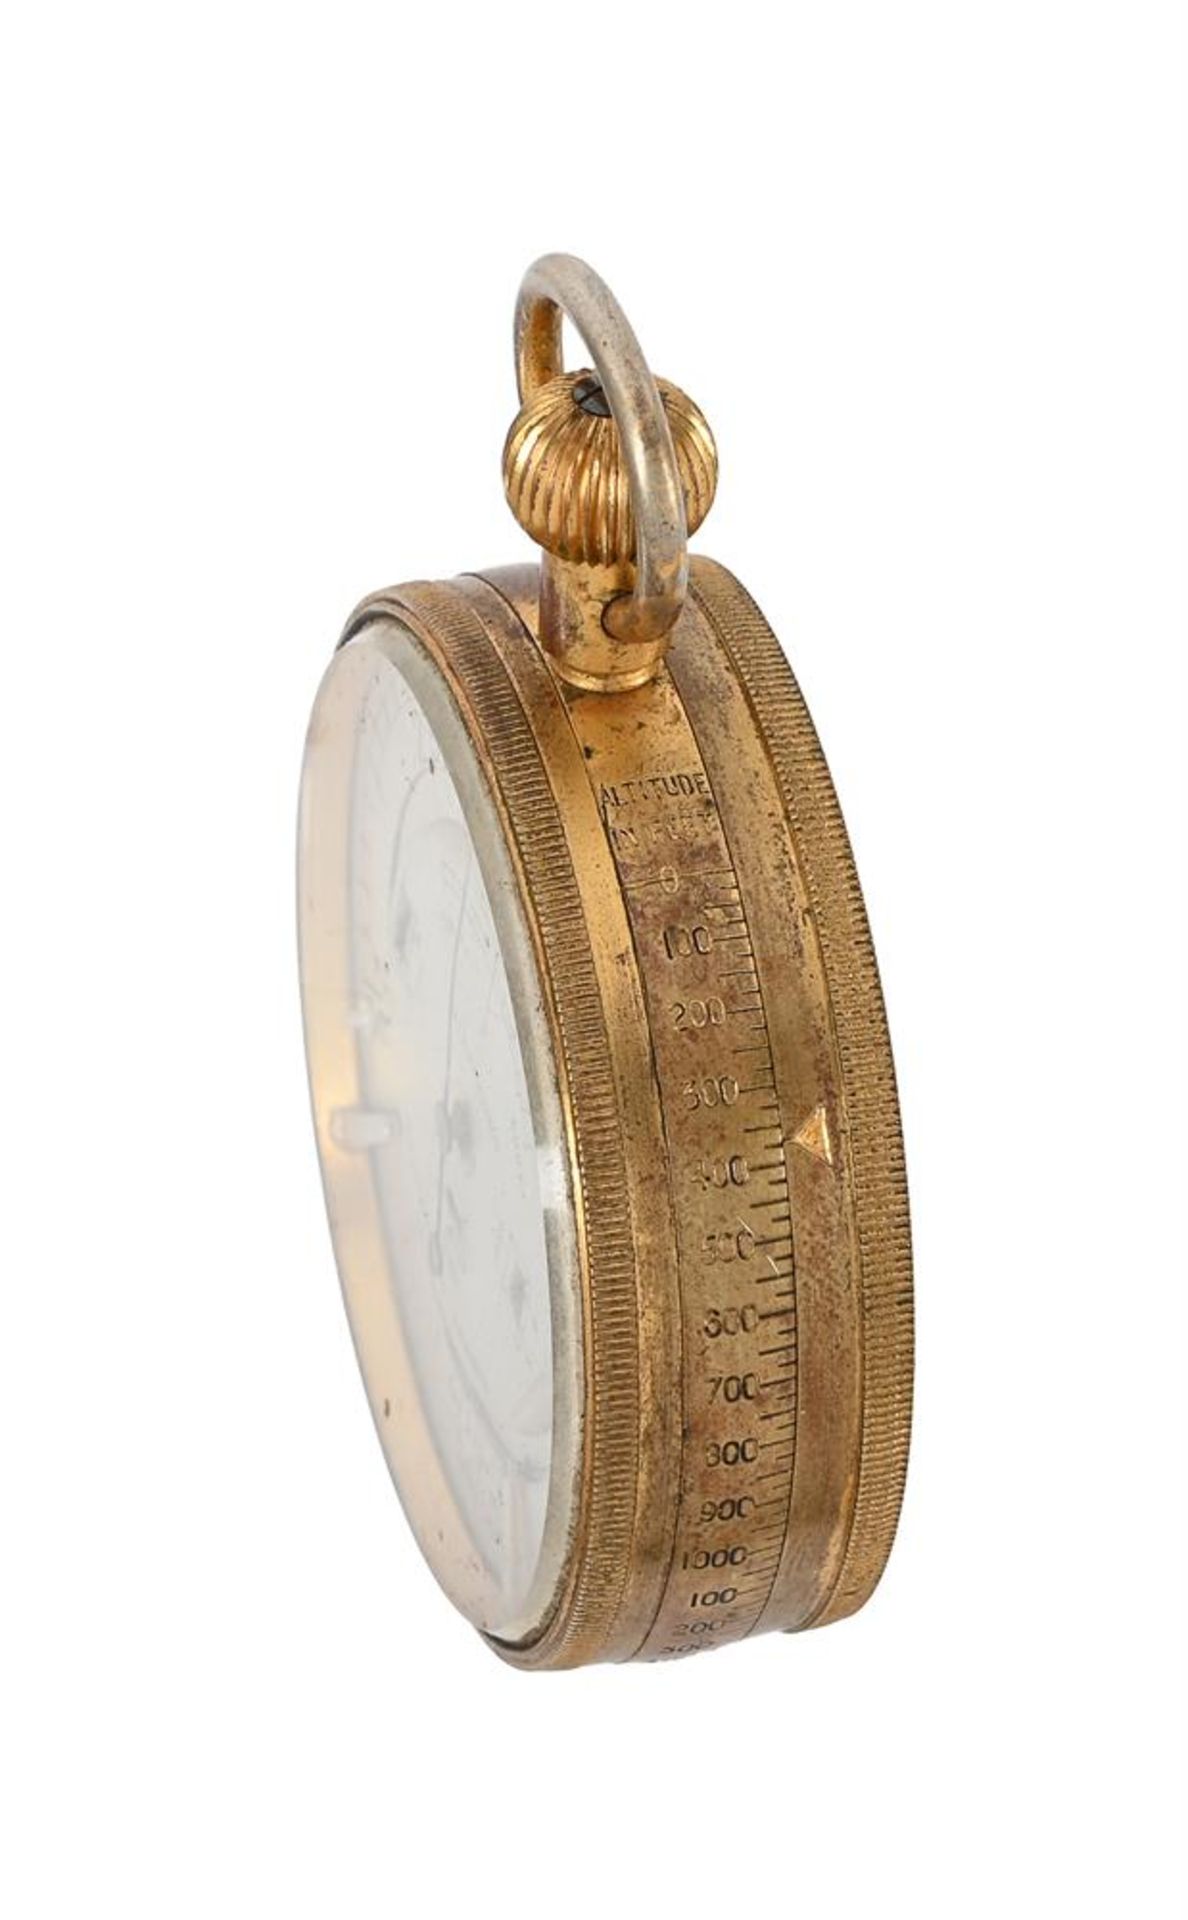 A GILT BRASS ANEROID POCKET WEATHER FORETELLER BOROMETER OR ‘WEATHER WATCH’ - Image 3 of 5